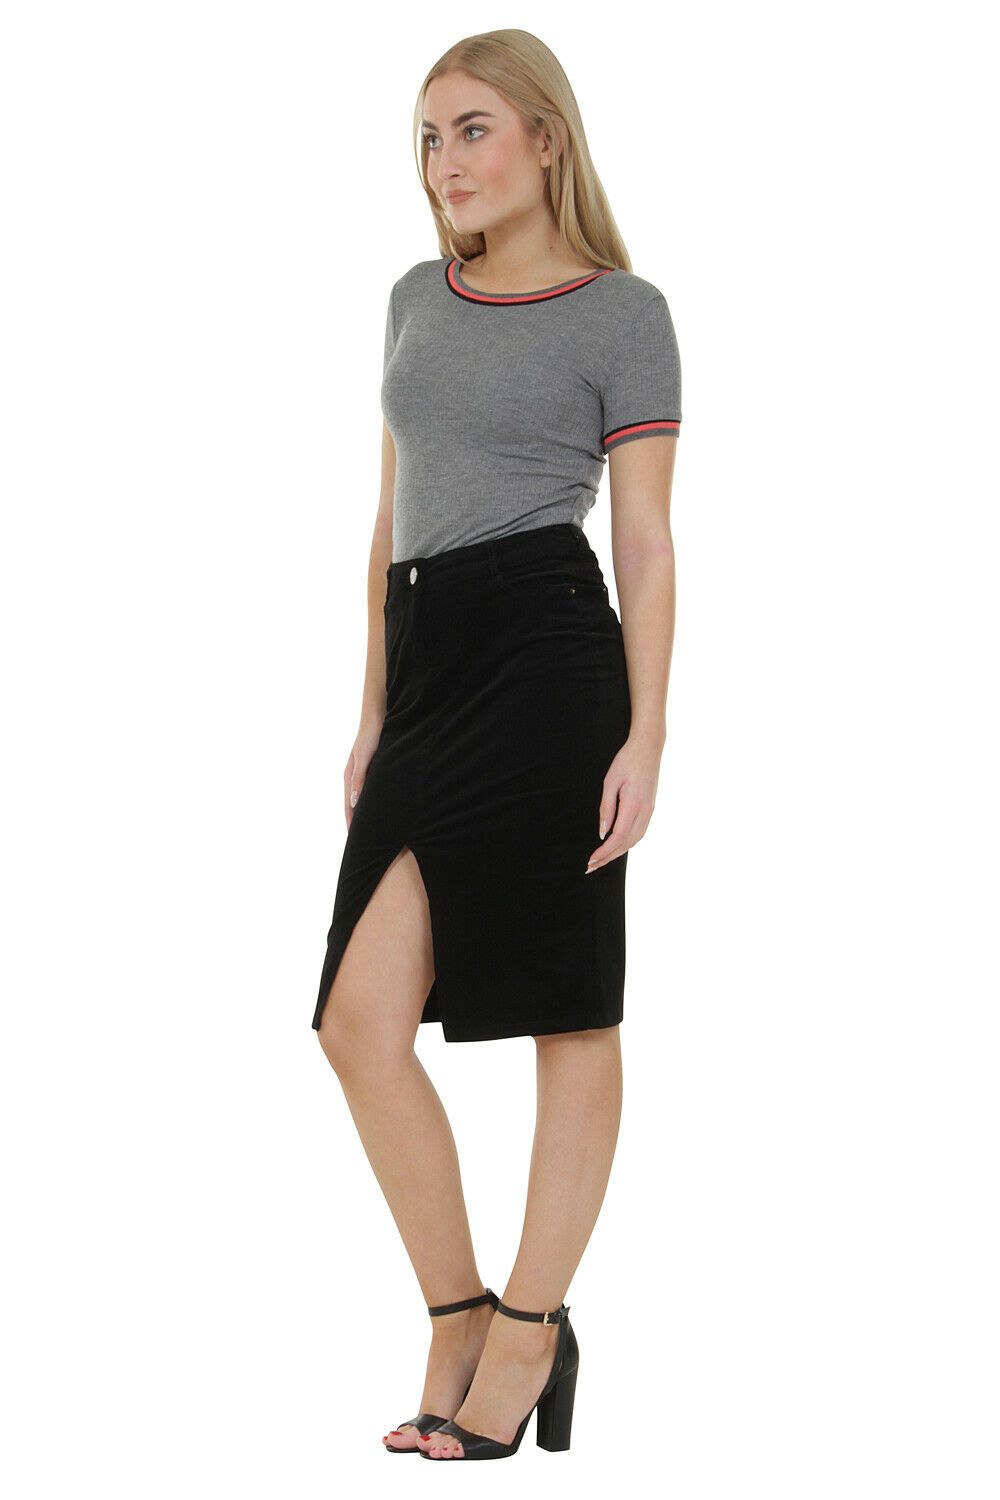 Full-length, angled front pose wearing black cord midi skirt with front split from Dungarees Online.